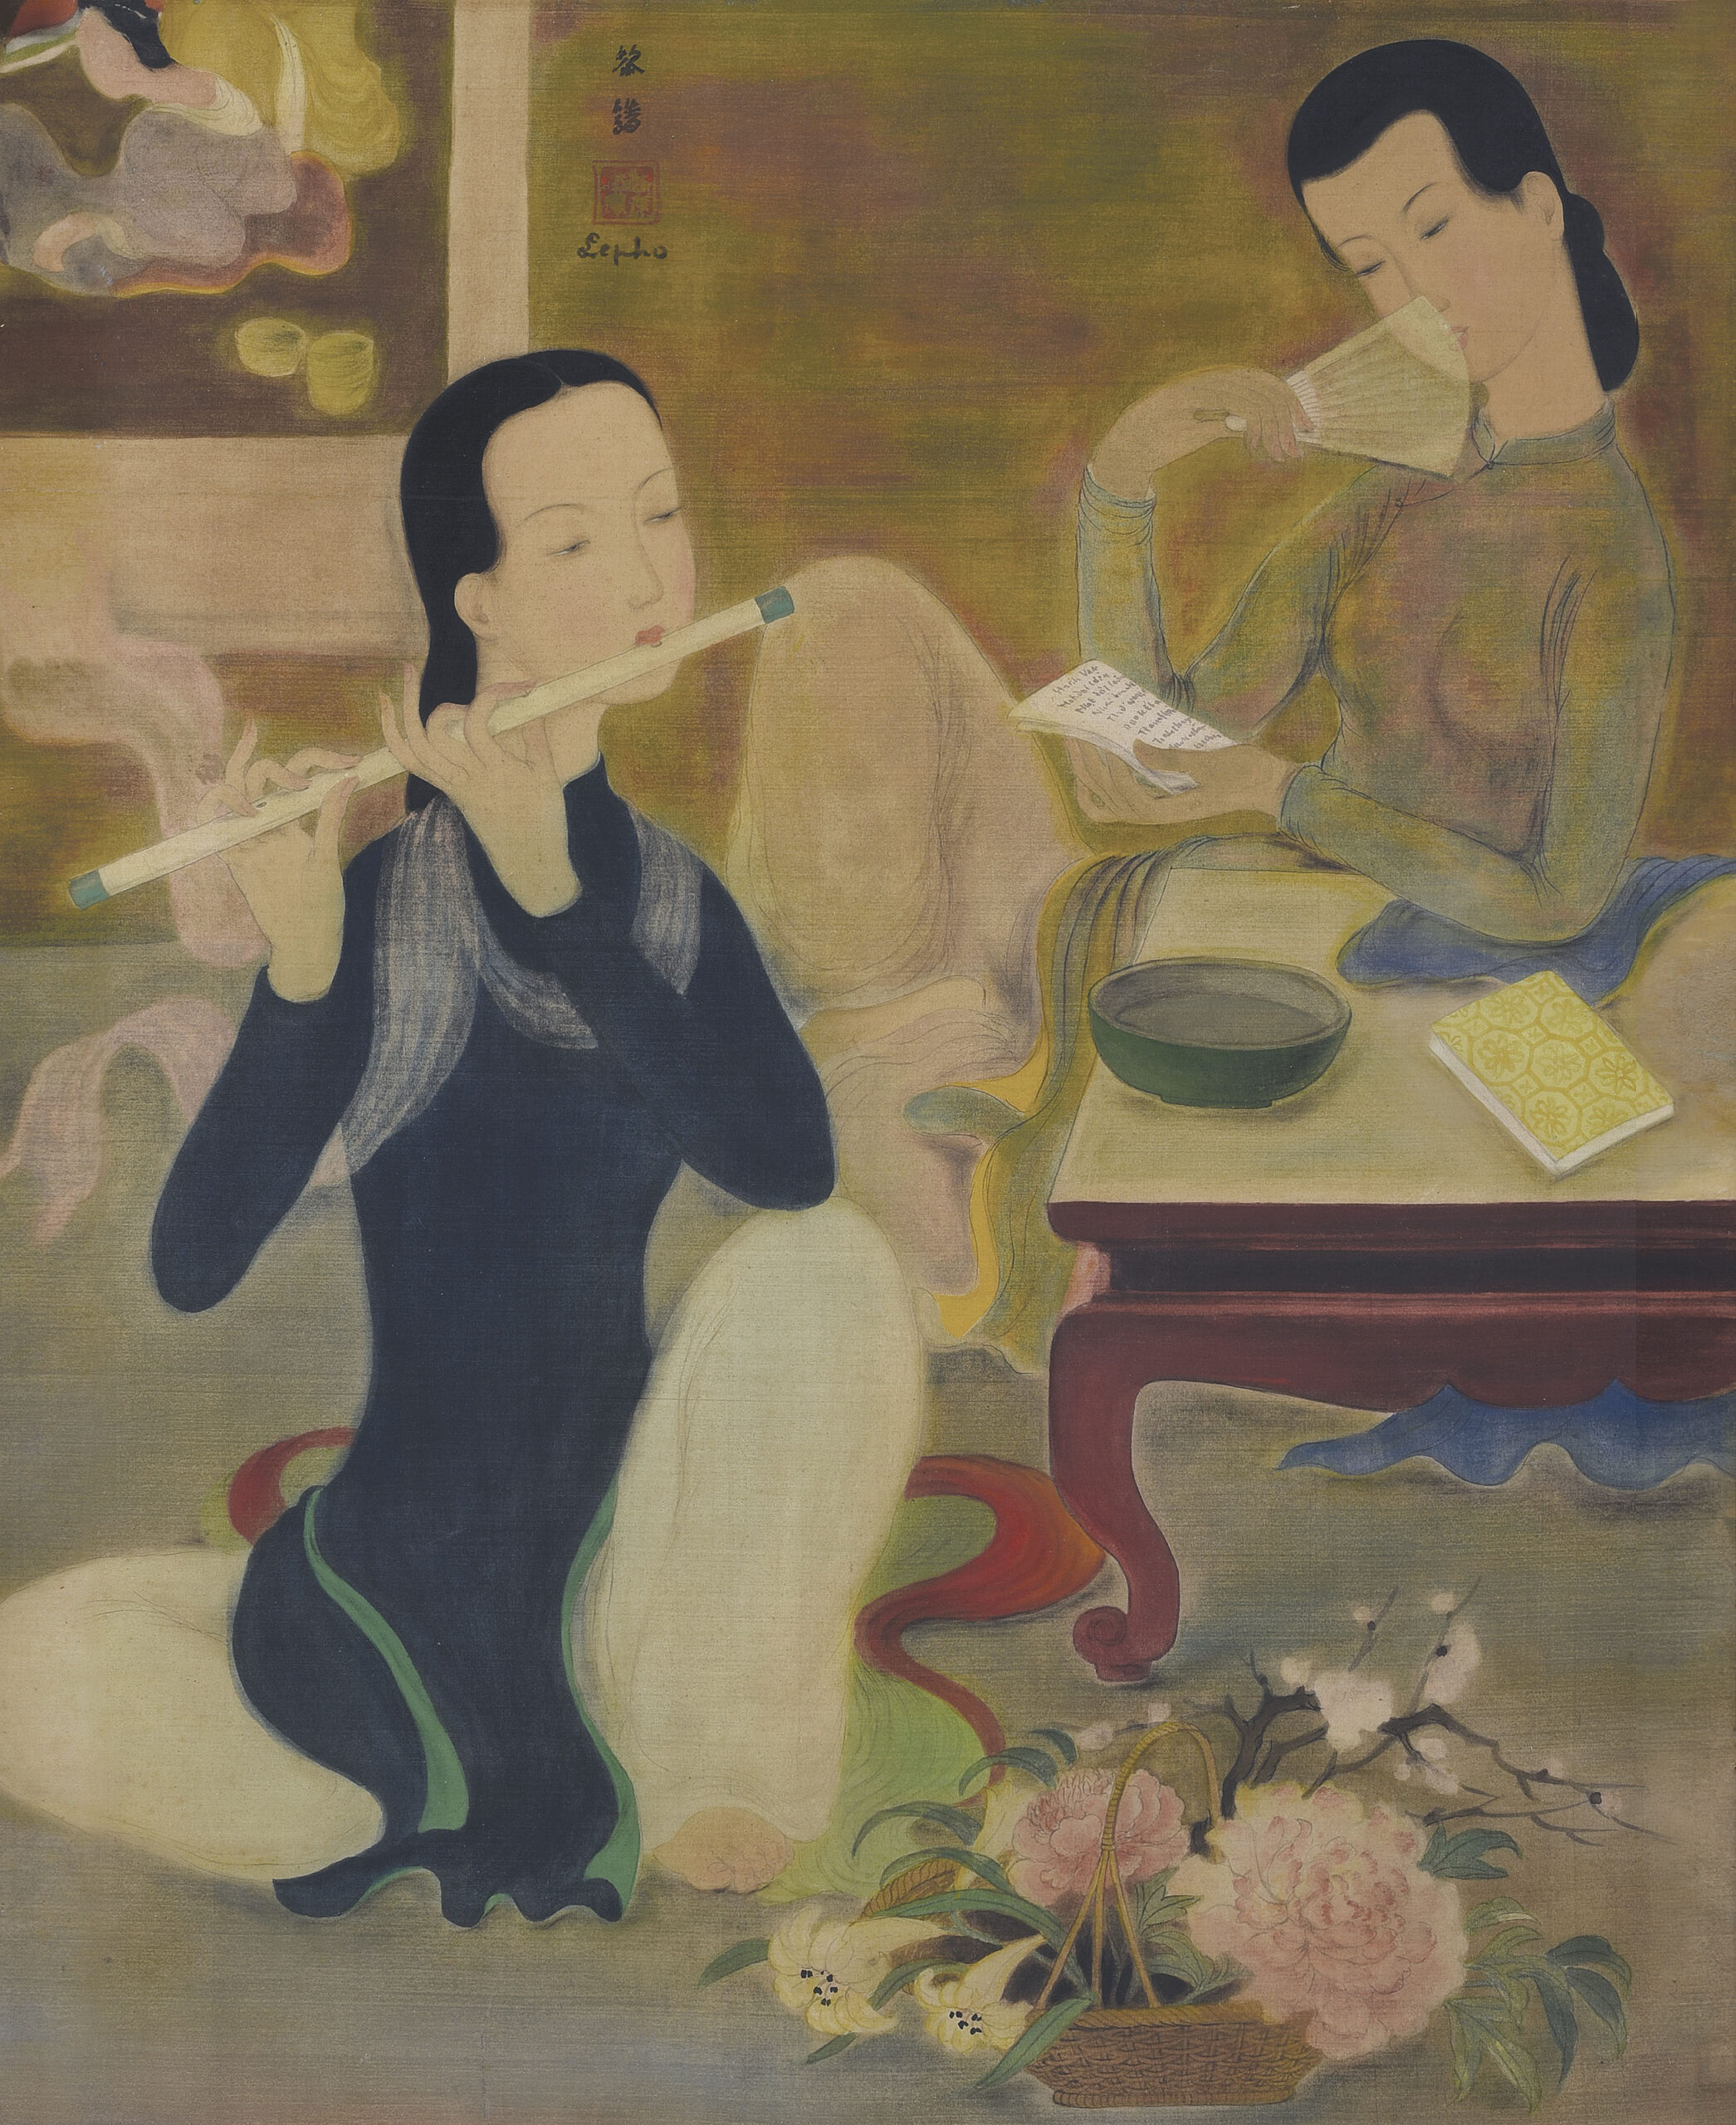 LE PHO (VIETNAM, 1907-2001)
Le Concert
signed 'Le pho', signed again in Chinese (upper centre); inscribed 'Le Concerte No 62' (on the reverse)
one seal of the artist
ink and gouache on silk laid on board
60 x 50 cm. (23 5/8 x 19 5/8 in.)
Painted in 1938
one seal of the artist

Galerie Romanet, Algiers
Acquired from the above by the previous owner, 1942
Private Collection, Europe

Algiers, Galerie Romanet &amp; Galerie Pasteur, 'Le Concert' 1941-1942

It is agreed today that the life of the great Vietnamese painter, Le Pho, can be divided into three distinct periods. In our regular meetings and discussions previously he agreed on this chronology of his entire oeuvre. Each period can be classically named and dated with their specific distinctive identifying characteristics. 

The first period begins with his years of training in Hanoi’s School of Fine Arts (1925-1930) all the way to the early 40’s. Le Pho clearly favoured the practice of oil on canvas, avoiding working with too much traditional Vietnamese lacquers due to his allergies but, gradually, he specialized in gouache and ink on silk. Beyond the techniques, his work was always marked by a strong and marked Mandarin solemnity, reflecting his scholarly background. 

The second period, from 1945 to the very early 60s, is known as the Romanet period and was named after the painter’s gallerist, Paul Romanet. During this period, Le Pho continued painting on silk - using a thick varnish that modifies the appearance of the colour palette which was more suitable to the artist’s new impressionist style, being influenced with his time spent in Paris. 

Finally, the Findlay period, from 1963 to the late 80s, named after an American gallery with whom Le Pho signed a contract (as did his friend and contemporary Vu Cao Dam). During this period, Le Pho returned to painting on canvas using exceptional bright colours unique to his work and still typified in an impressionist style. At the end of the 80’s, after suffering from a bad accident, he never painted again. 

Within these periods, within the great book of life, beyond the chapter, we must aim to identify each page which marks the work of an artist and lead us in the full awareness and understanding of universal beauty, an exceptional moment where the artist’s talent meets in perfect harmony with the spectator’s sensitivity. 

The present lot The Concert, is one of Le Pho’s major works, unique in composition and extremely important as it provides us with a key insight and understanding of his life in Paris. 

When the painter completed our painting, probably in 1938, he was at the peak of his artistic career and excelled in the use of gouache and ink on silk. Up to then, the painter worked mostly on silk; creating representations of beautiful Madonna’s and maternities inspired by the European Primitives he spent time observing in museums since his arrival in Paris in 1932. In this period he also practiced on subjects such as evanescent young women, still-life and flowers arrangements. 

The situation of our artist reminds us of Nguyên Gia Thiêu (1741-1798) and his masterpiece the Cung Oan Ngân Khuc (Sadness of the Palace) because the poet and the painter meet in these verses joining together the Buddhist pessimism on impermanence and the universal grief and the pessimism of the former ruling class, which was disappointed by the Tây-Son’s revolt : 

How pure was the accent of the cithara in the back of the palace, 
And the plaintive flute under the purple veranda! 
The more their romance vibrated and the more I was exhilarated, 
The more their rhythm rushed, the more my heart soften. 

To better understand the context of this painting and to better imagine the scene and the moment of execution, a few facts need to be recalled. In 1931, Le Pho was assisting Victor Tardieu during the Colonial Exhibition in Paris. The International Colonial Exhibition (Exposition Coloniale Internationale) , wasa six-month colonial exhibition held in Paris, France in 1931 that attempted to display the diverse cultures and immense resources of France's colonial possessions. In 1937, he was the artistic director of the Indochina section at the Universal Exhibition in Paris. In the meantime he was teaching at the Hanoi Fine- Art School, his students were brilliant and his talent was well regarded and recognized by the distinguished and cultural circles in Indochina. 

What could possibly have pushed a well-heeled man of society of thirty years of age to leave behind a successful life and material comforts for a far away and unknown city? Le Pho had a few recommendations, spoke perfect French but in the late 1930s, Paris was the place where all the artistic talents of the world would gather and congregate together – a gathering of great creative minds and impulses. At that time, Le Pho was just a painter among many trying to conquer not only Montparnasse but also the Parisian galleries. At the very least, following the proactive actions of AGINDO ( The Economical Agency of Indochina) and the 1931 Exhibition - it meant there was already a public awareness there of his art. 

Perhaps he was thinking of these four verses of Chinh Phu Ngâm (the masterpiece of Vietnamese literature of the late eighteenth century written by Phan Huy Ich):

Each year the charms further fade; 
Man lingers in distant lands. 
Why the body and the shadow, never to be separated 
Now are like the evening star and the morning star? 

This painting is exceptional because it is the manifesto of what makes a man’s destiny: the journey, a lifelong quest or as an escape. 

At the very moment Le Pho was painting this scene, we can imagine him feeling a profound nostalgia for his native homeland. Here we are, far away (as for the iconography) of the Madonnas and yet so strongly influenced by the great European Primitives, beautiful portraits of women wrapped at times in their gentleness or at times in their seduction. 

The great painter offers us here the phantasmagorical description of a Vietnamese interior full of charm, coming through with an unprecedented force. A beautiful lady musician plays the flute while another evanescent young woman reads a letter (a booklet) behind her fan. The writing can be identified as quôc ngû and we can identify a few words: Môt vài lòi (a few words), Thò vong (resounding breath). The woman in her ao dai enjoying the fan leans nonchalantly on a low Vietnamese style table. The musician seems to actively search, deeply within herself, the music to find the sounds of a lost and loved Vietnam. 

Le Pho used with great mastery the black ink along with soft tones of gouache such as yellow, red, green and blue giving the rich composition a true ethereal lightness. In the right lower corner of the painting, an atypical Vietnamese wicker basket contains a flower arrangement of Asian flowers – the lily, peony and prunus. 

The effort by the artist to make the scene as Asian as possible is shown in the details in the painting; from the pattern on the notebook’s cover placed on the table; or even in the kakemono hanging on the wall. We can discern a Chinese influence probably inspired by Le Pho’ s visit in China in 1934 as well as a Japanese influence evoked in the female headdress. Finally an empty background in a green and brown colour reinforces the relationship of the two young women immersed in their scholarly pursuits. 

This magnificent work was previously exhibited in 1942, in the Galerie Romanet in Algiers (then French Algeria). It was purchased by a well-known French personality and was kept intact in the family to this day, including its French frame (from the early 1940s) which was made specifically for the purpose of this exhibition. A breath-taking work, a masterpiece, this present Lot represents the absolute best in the master painter’s oeuvre. 

Jean-François Hubert Senior Consultant, Vietnamese Art